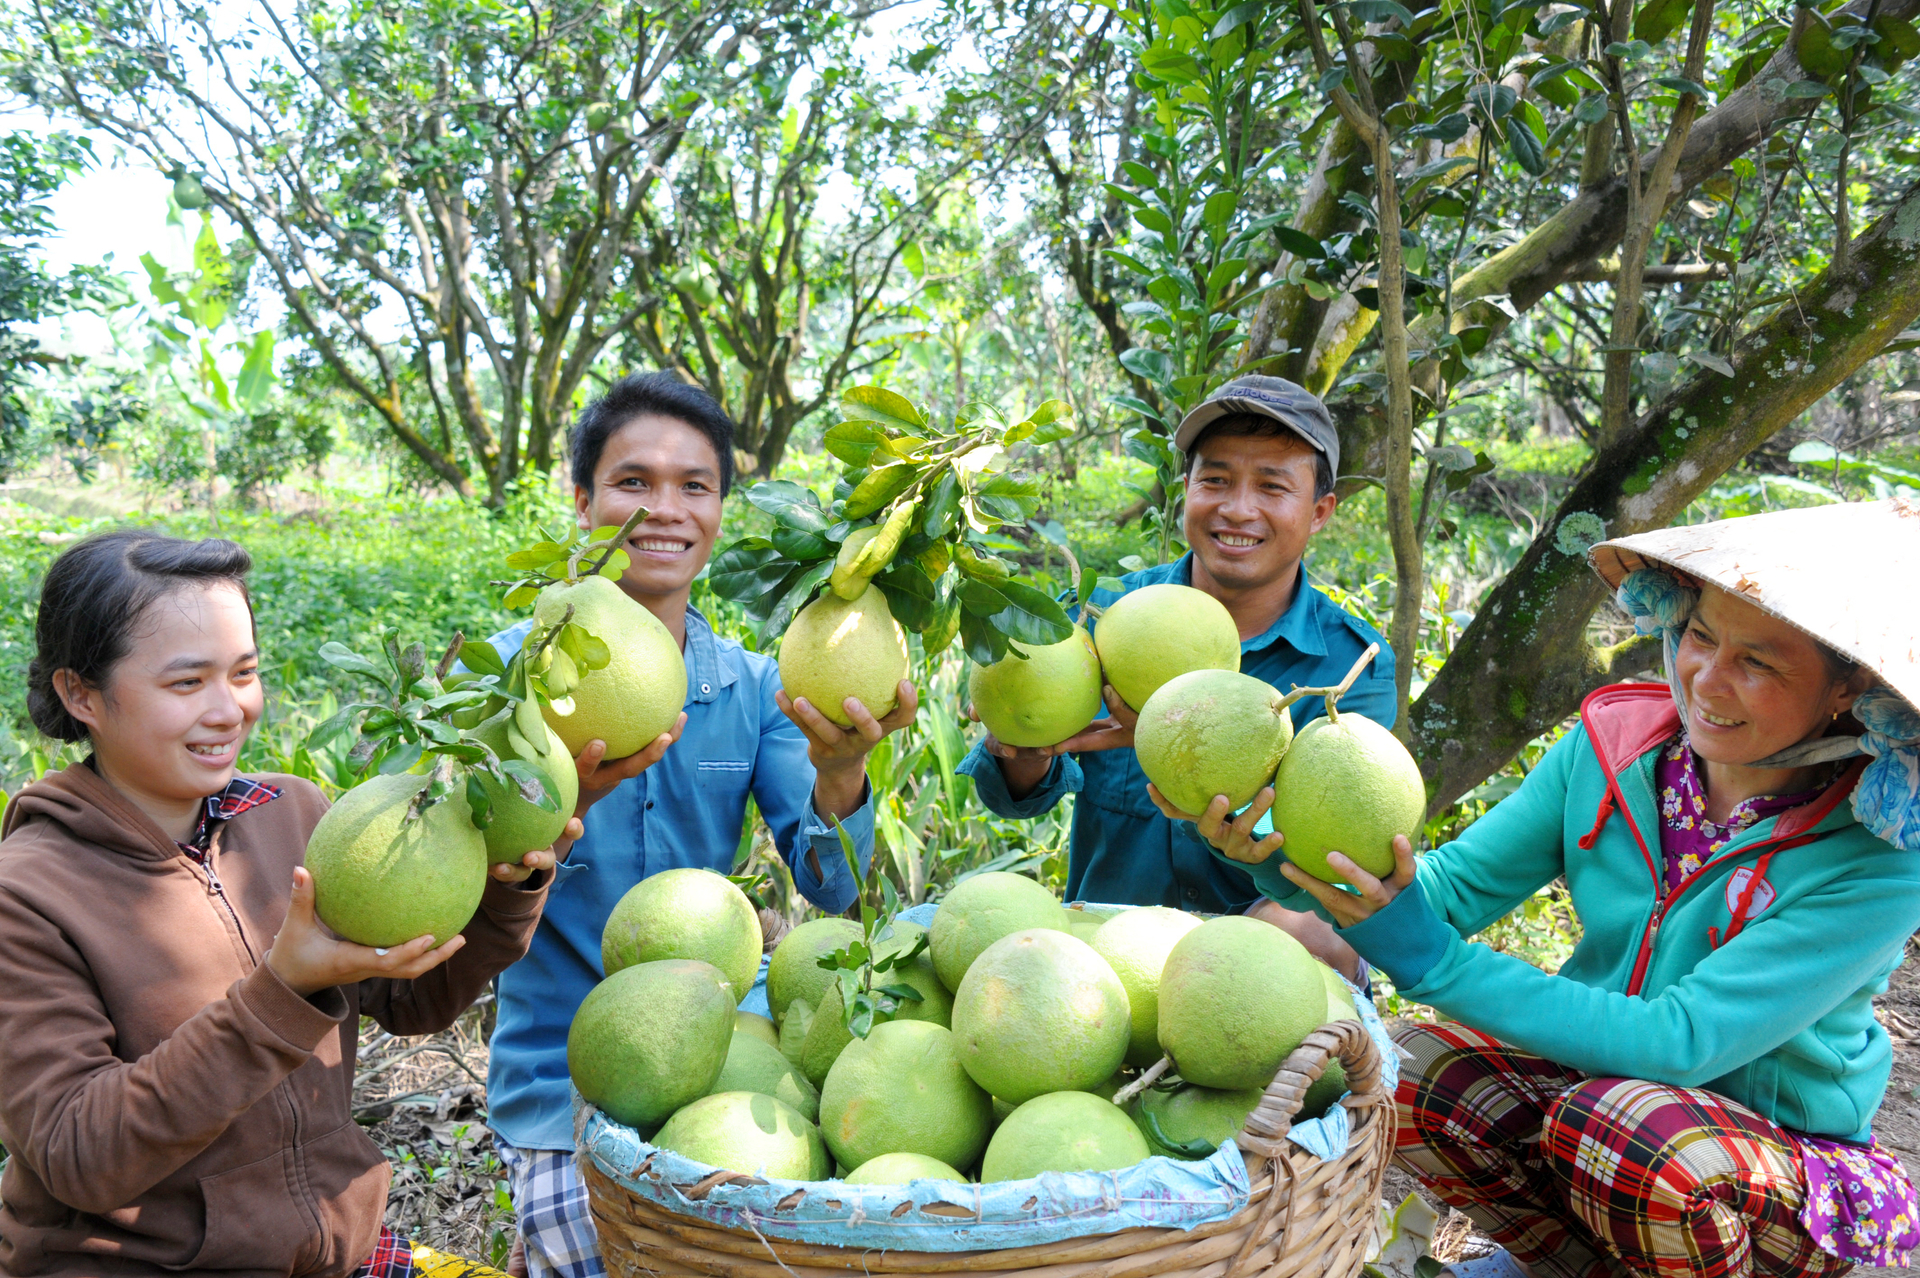 Farmers build many fruit growing models in association with eco-tourism development, profits 1.5 - 2 times higher than that of specialized fruit tree farming. Photo: Le Hoang Vu.